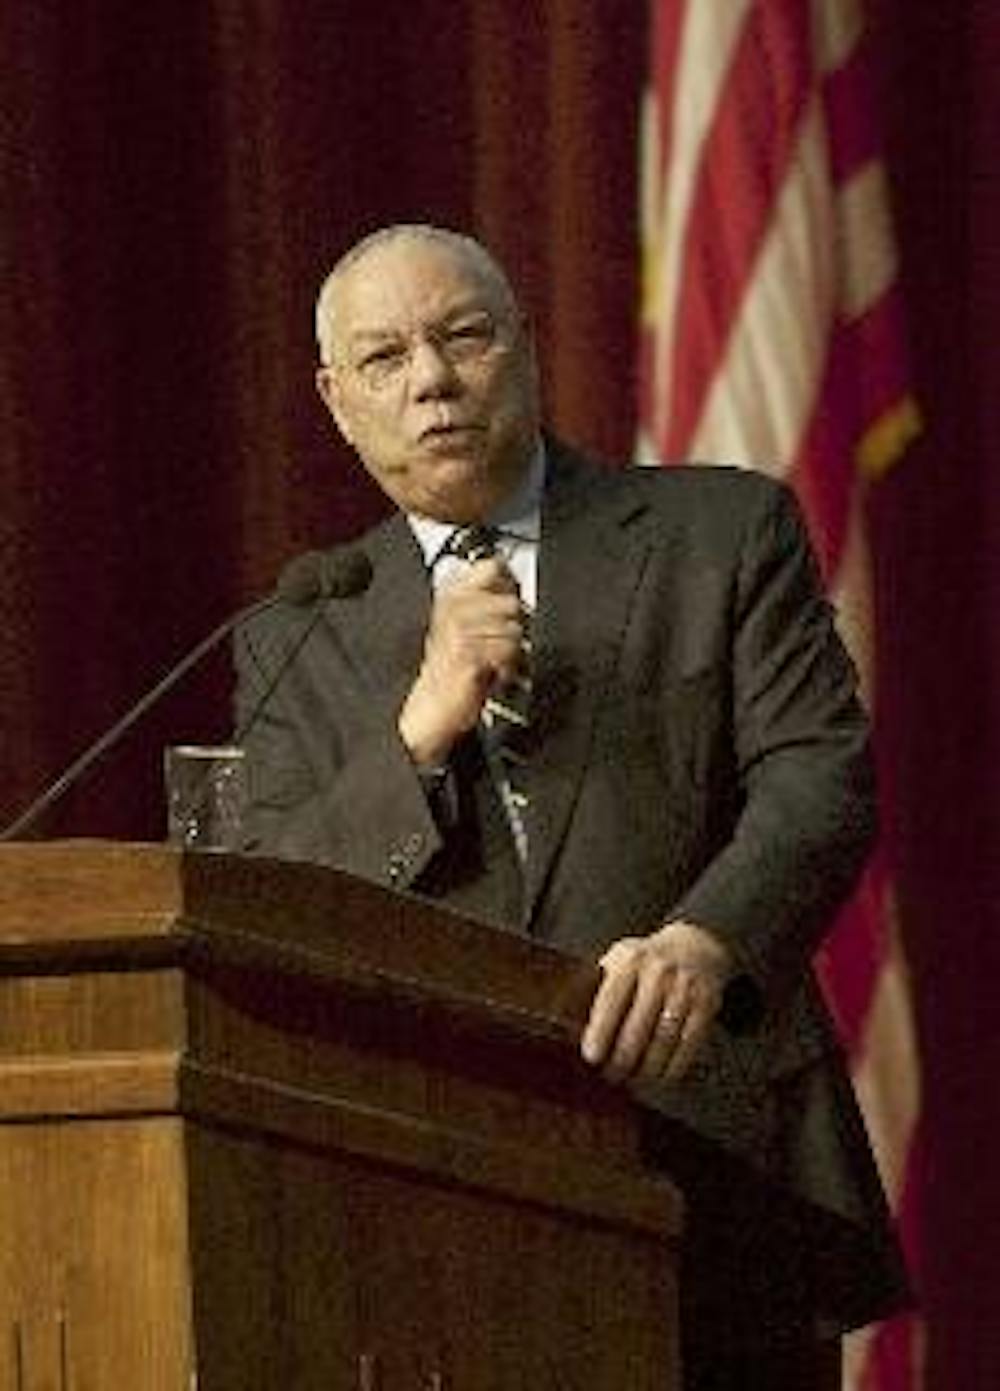 Colin Powell spoke to an almost full Millett Hall Tuesday evening as part of the Jack R. Anderson lecture series.